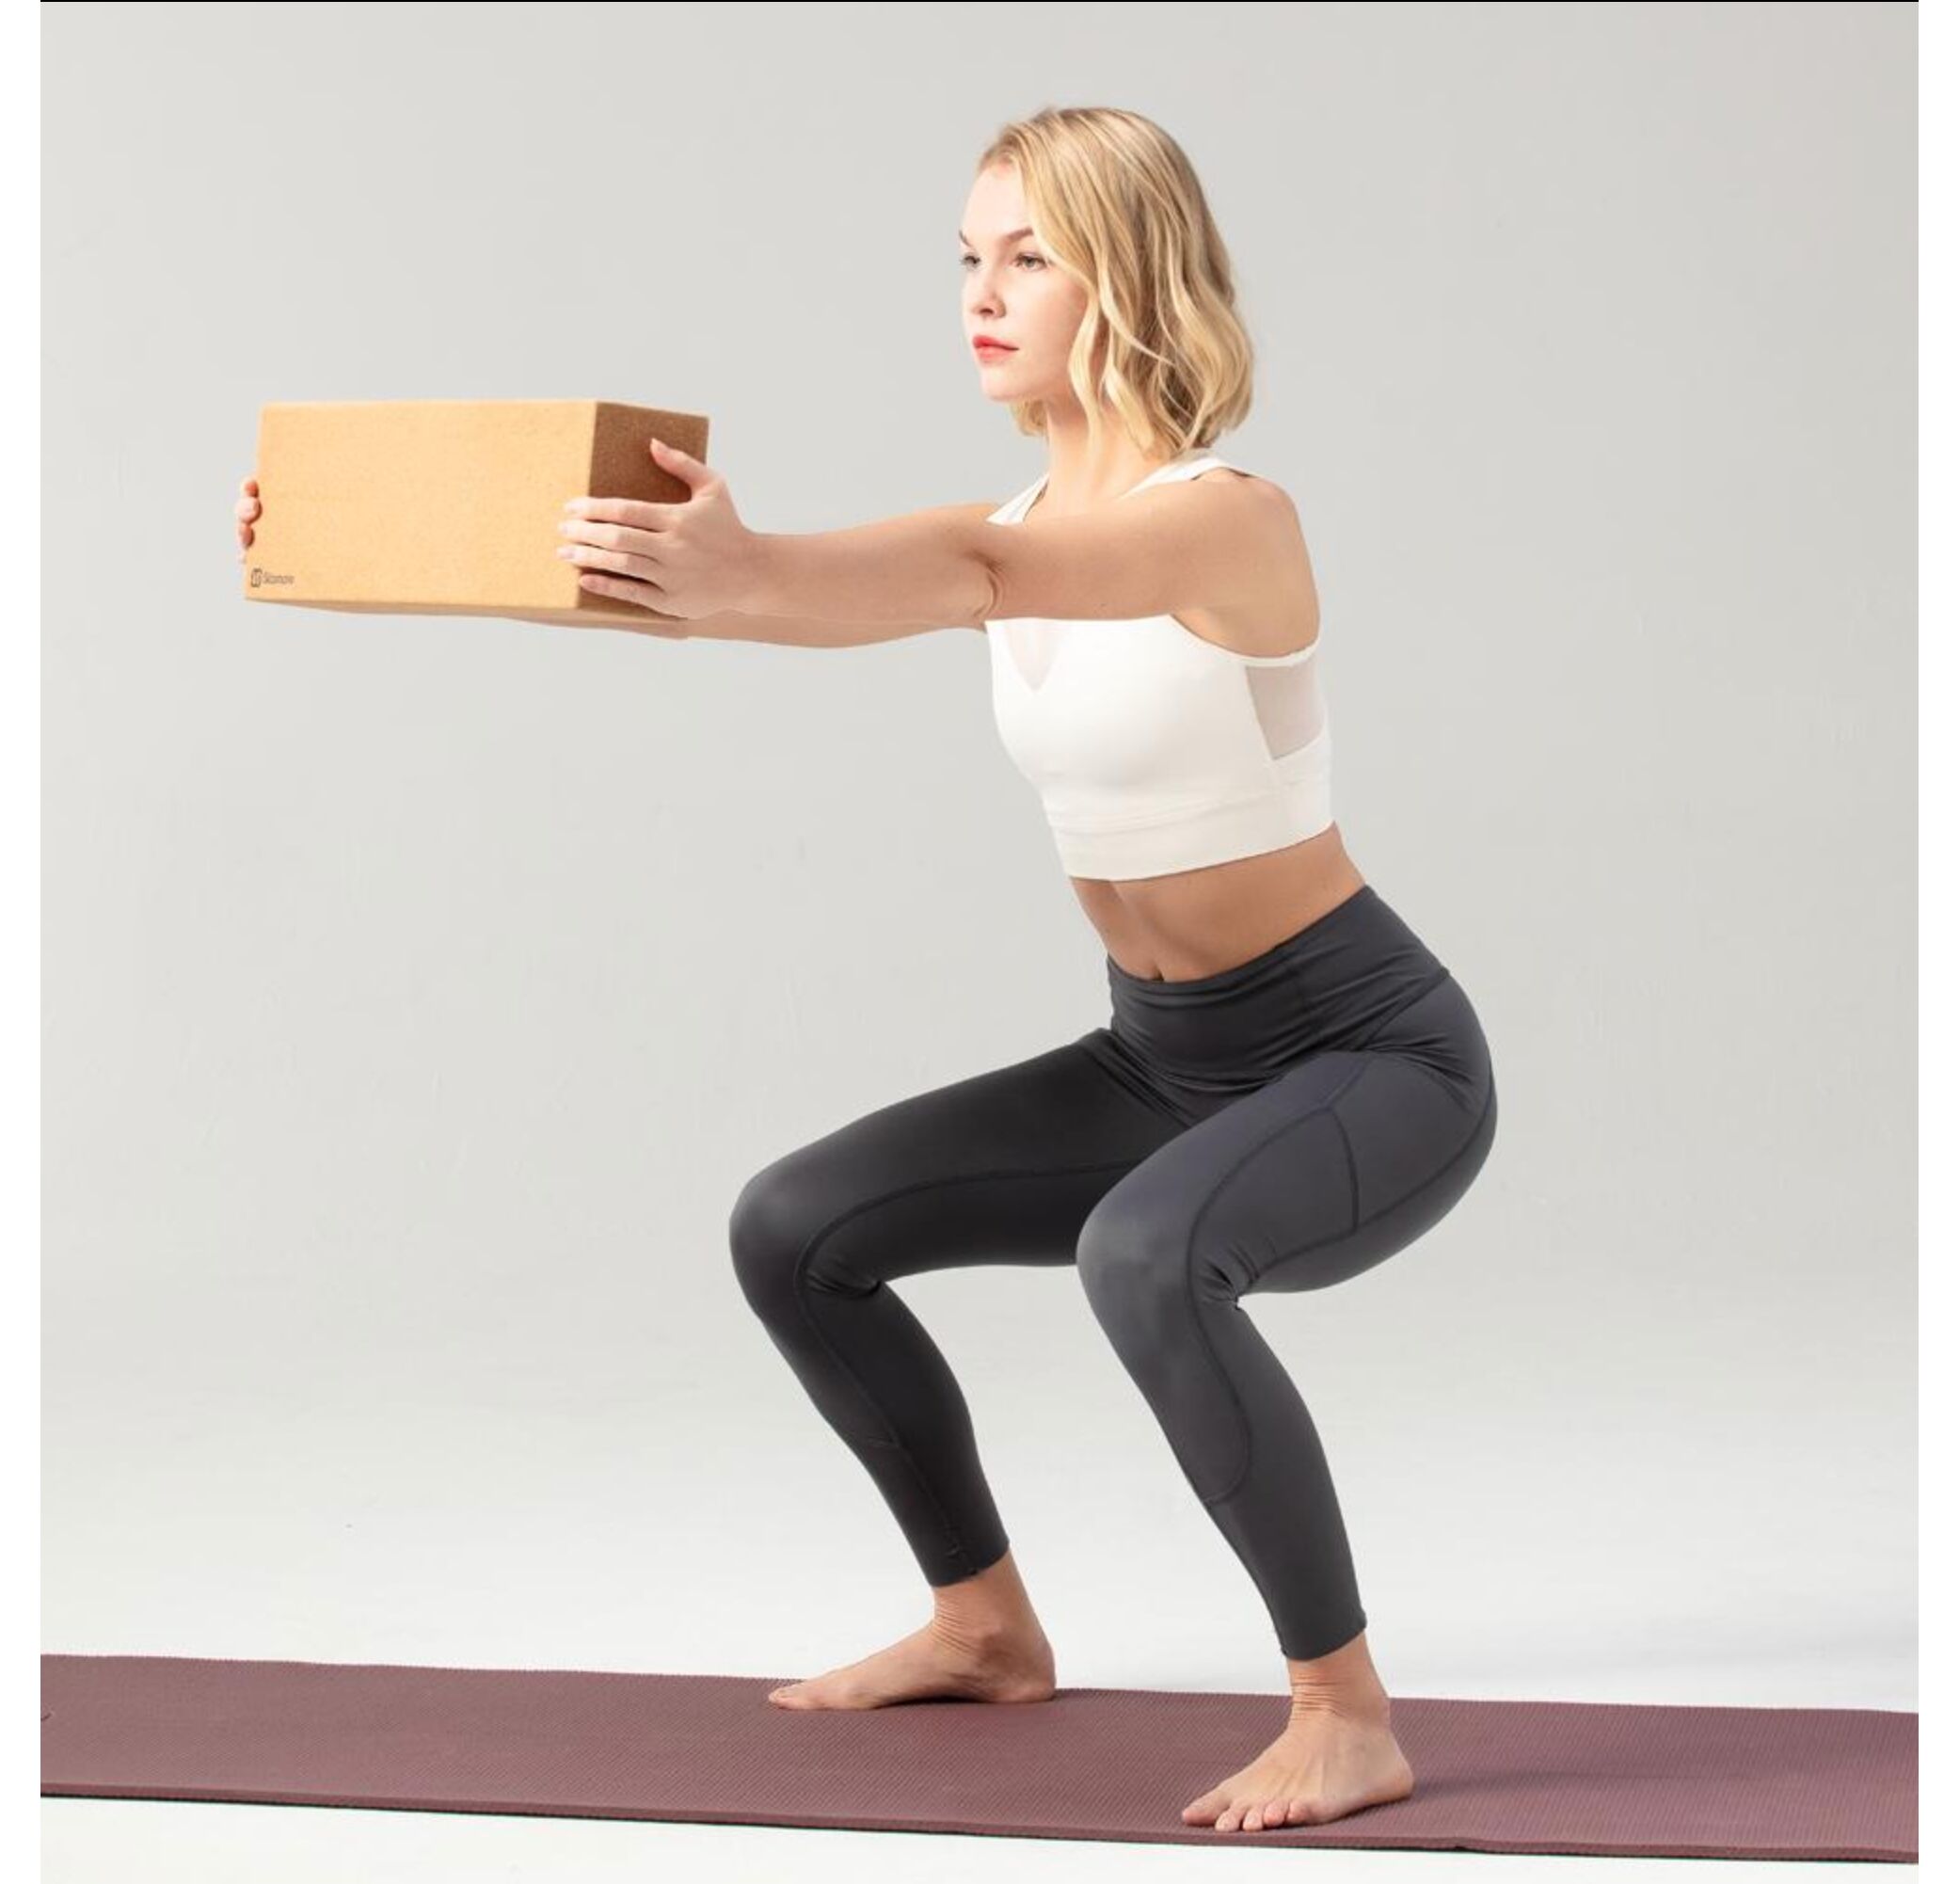 Accessories :: Slashare 6Pcs Cork Yoga Blocks Set: 4pcs Size 4x6x9 and 2pcs  Size 4x6x18 of Eco-Friendly Material Bricks, Naturally Hypoallergenic and  With Beveled Edges for Practicing Exercising Work-out Sports Outdoors for